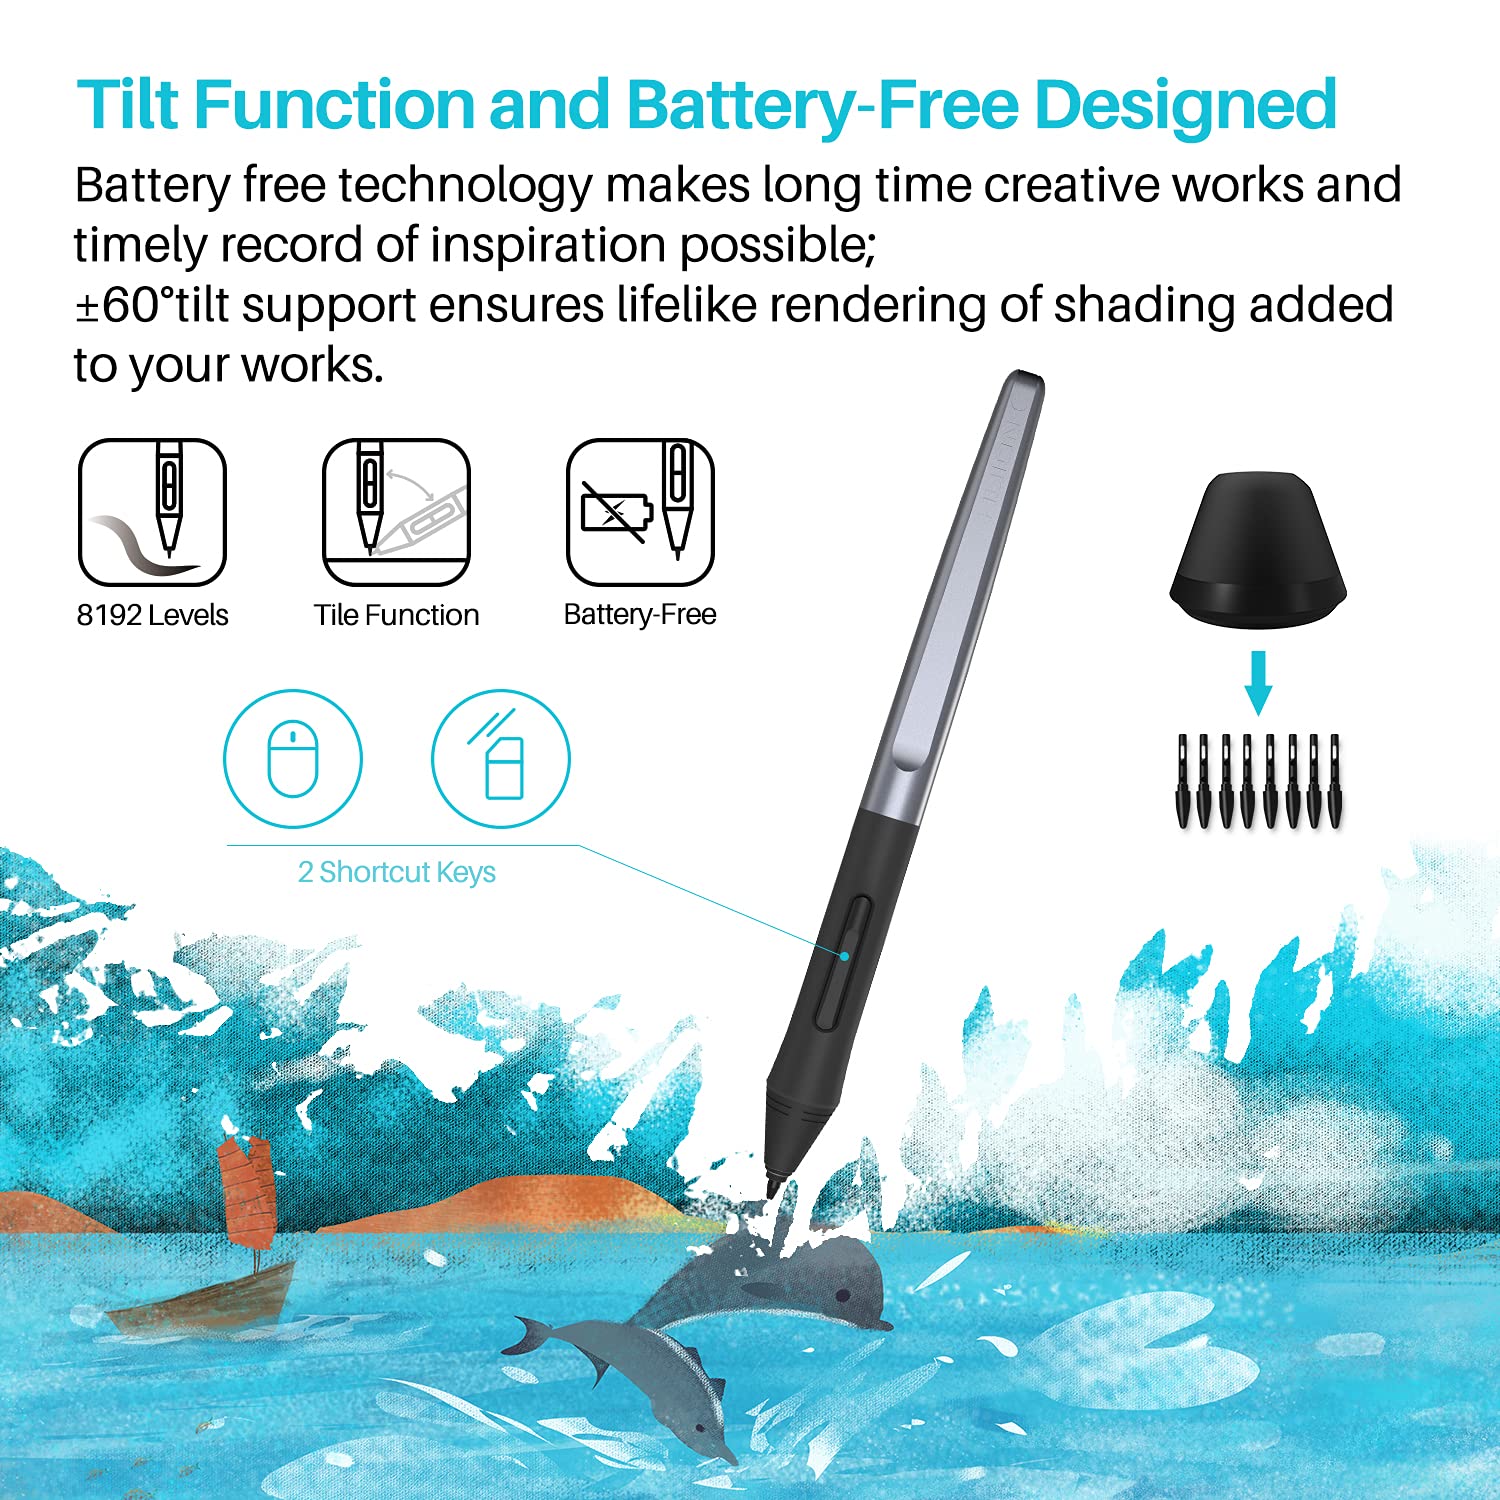 HUION H610 Pro V2 Graphic Drawing Tablet Android Supported Pen Tablet Tilt Function Battery-Free Stylus 8192 Pen Pressure with 8 Express Keys